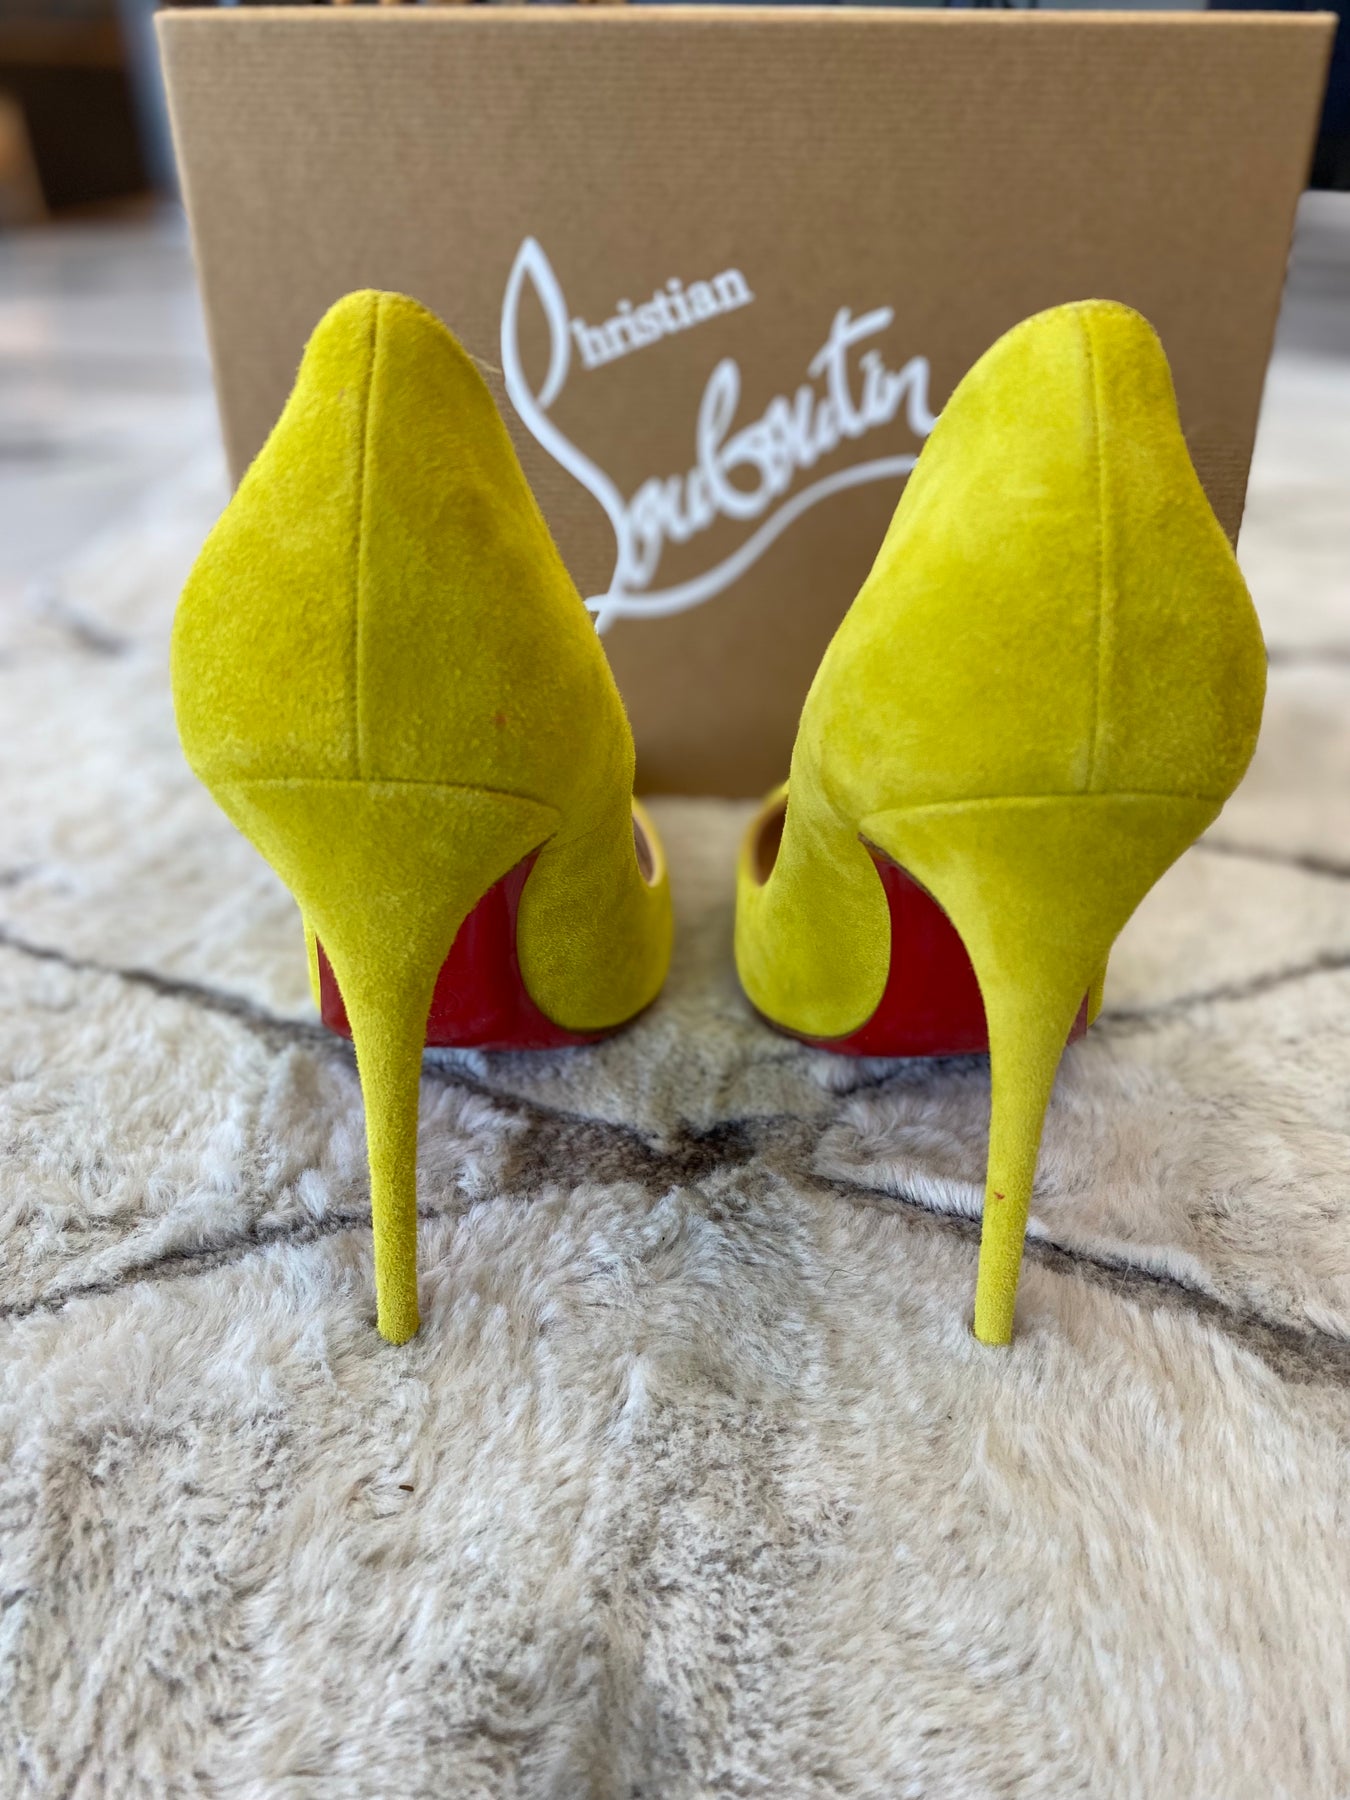 Christian Louboutin So Kate 120 Suede Pumps